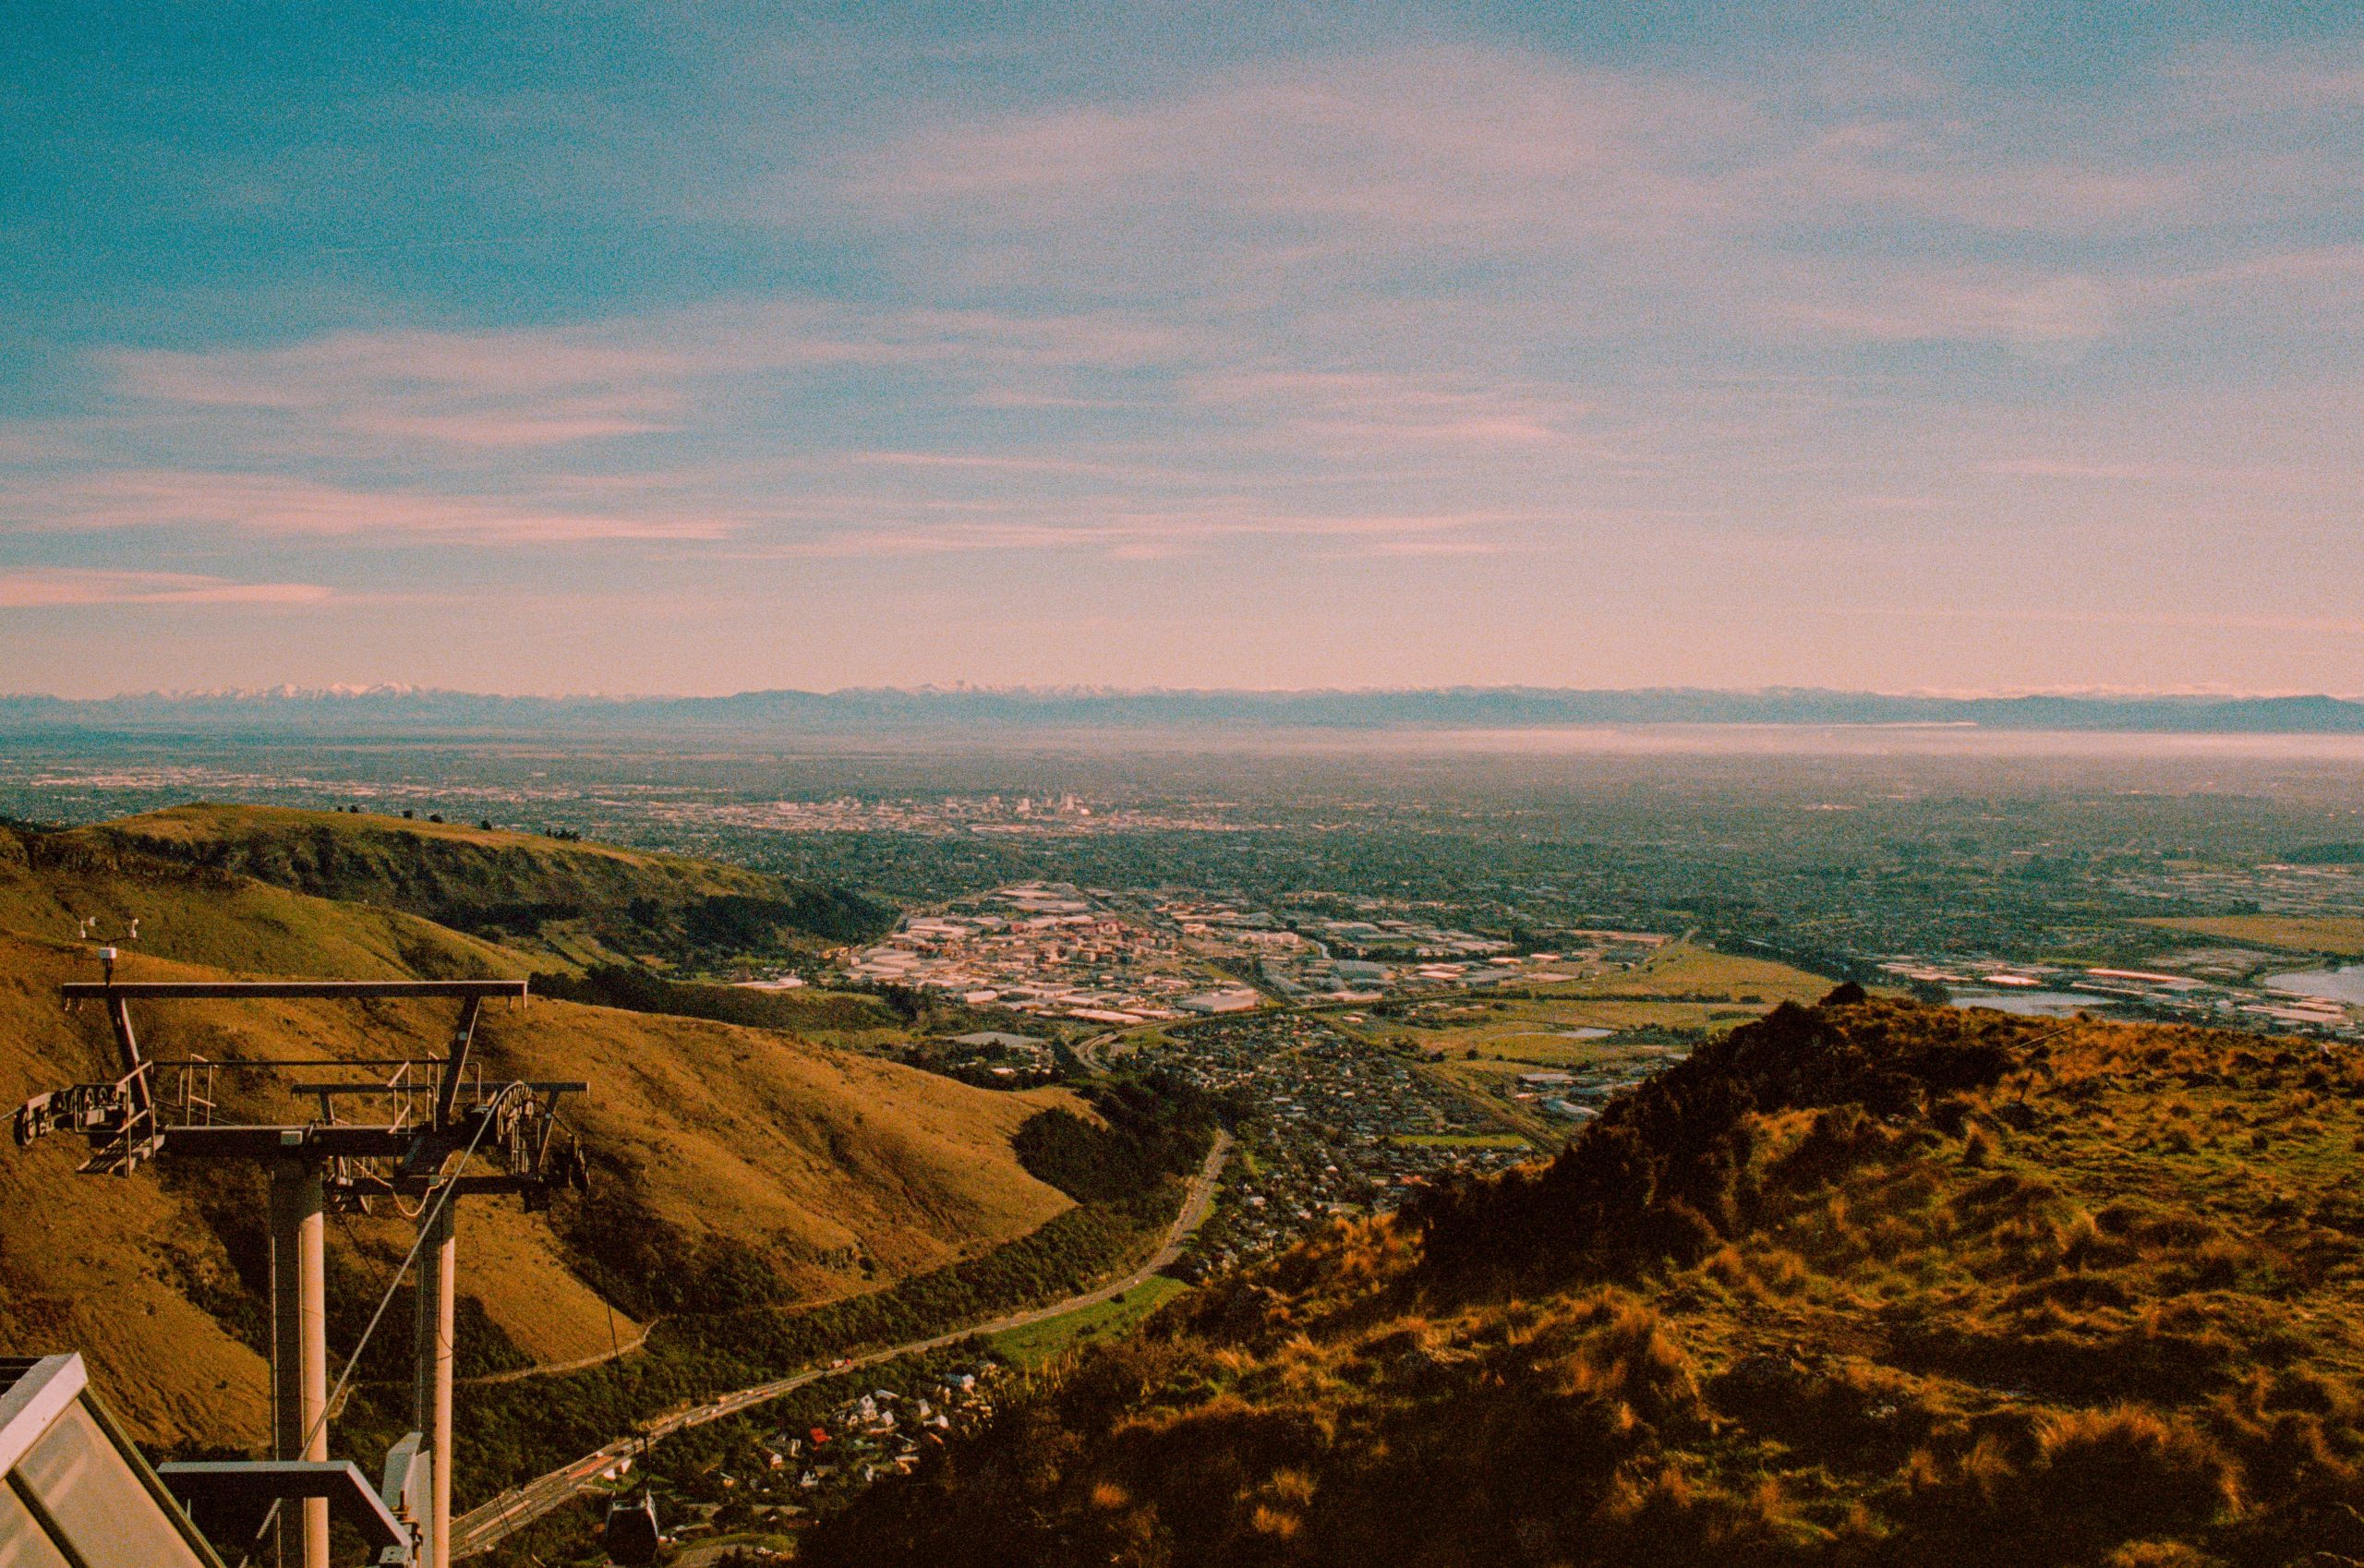 A cable car pylon at the top of a hill with grassy slopes, a city and a harbour in the background.